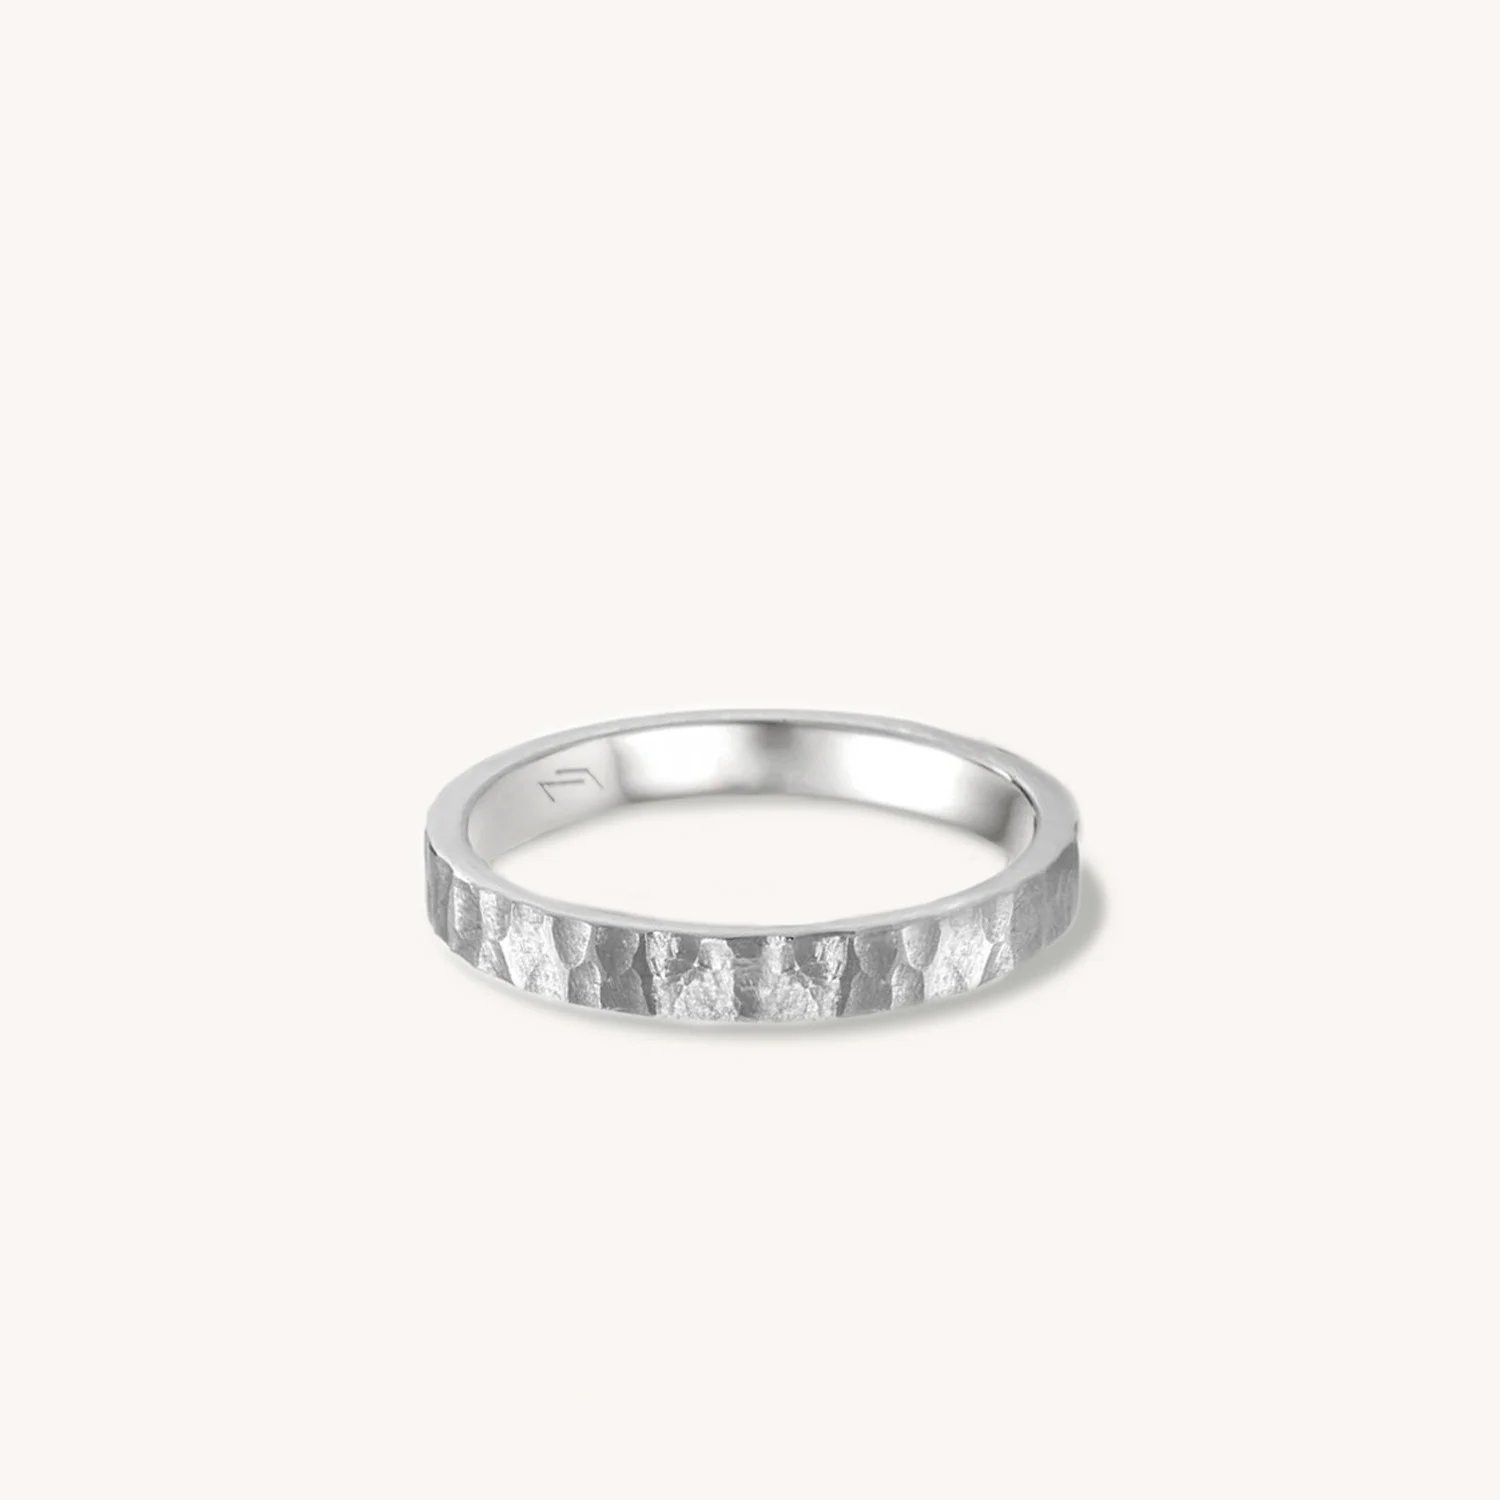 Black Striped Mahakal Silver Stainless Steel Ring | B25-MAY-61 | Cilory.com